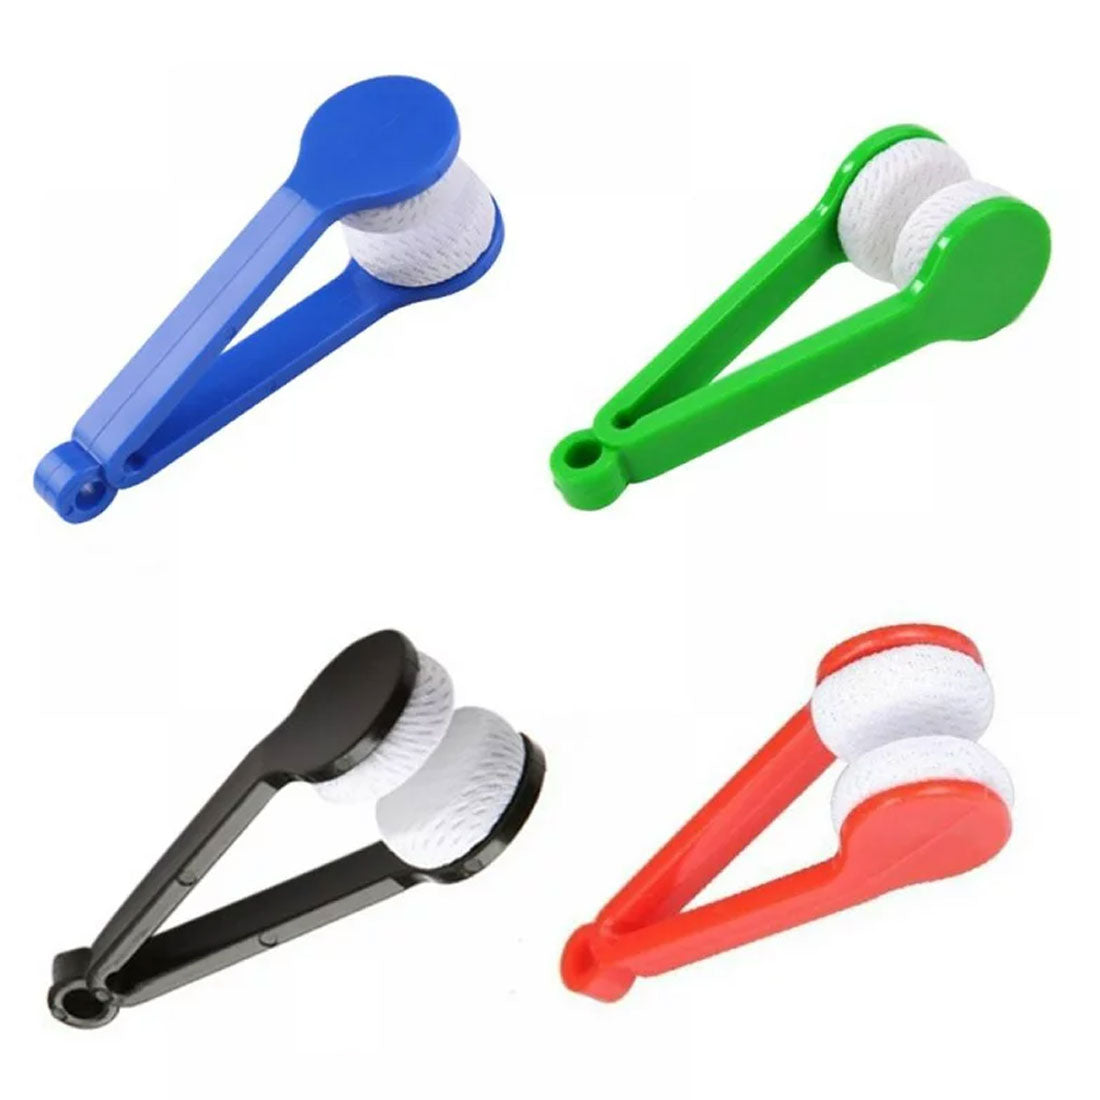 5PCS Mini Sun Glasses Sunglasses Eyeglass Microfiber Spectacles Cleaner  Soft Wipe Brushes Scruber Cleaning Tool Eyeglasses Cleaner Cleaning Clip  with